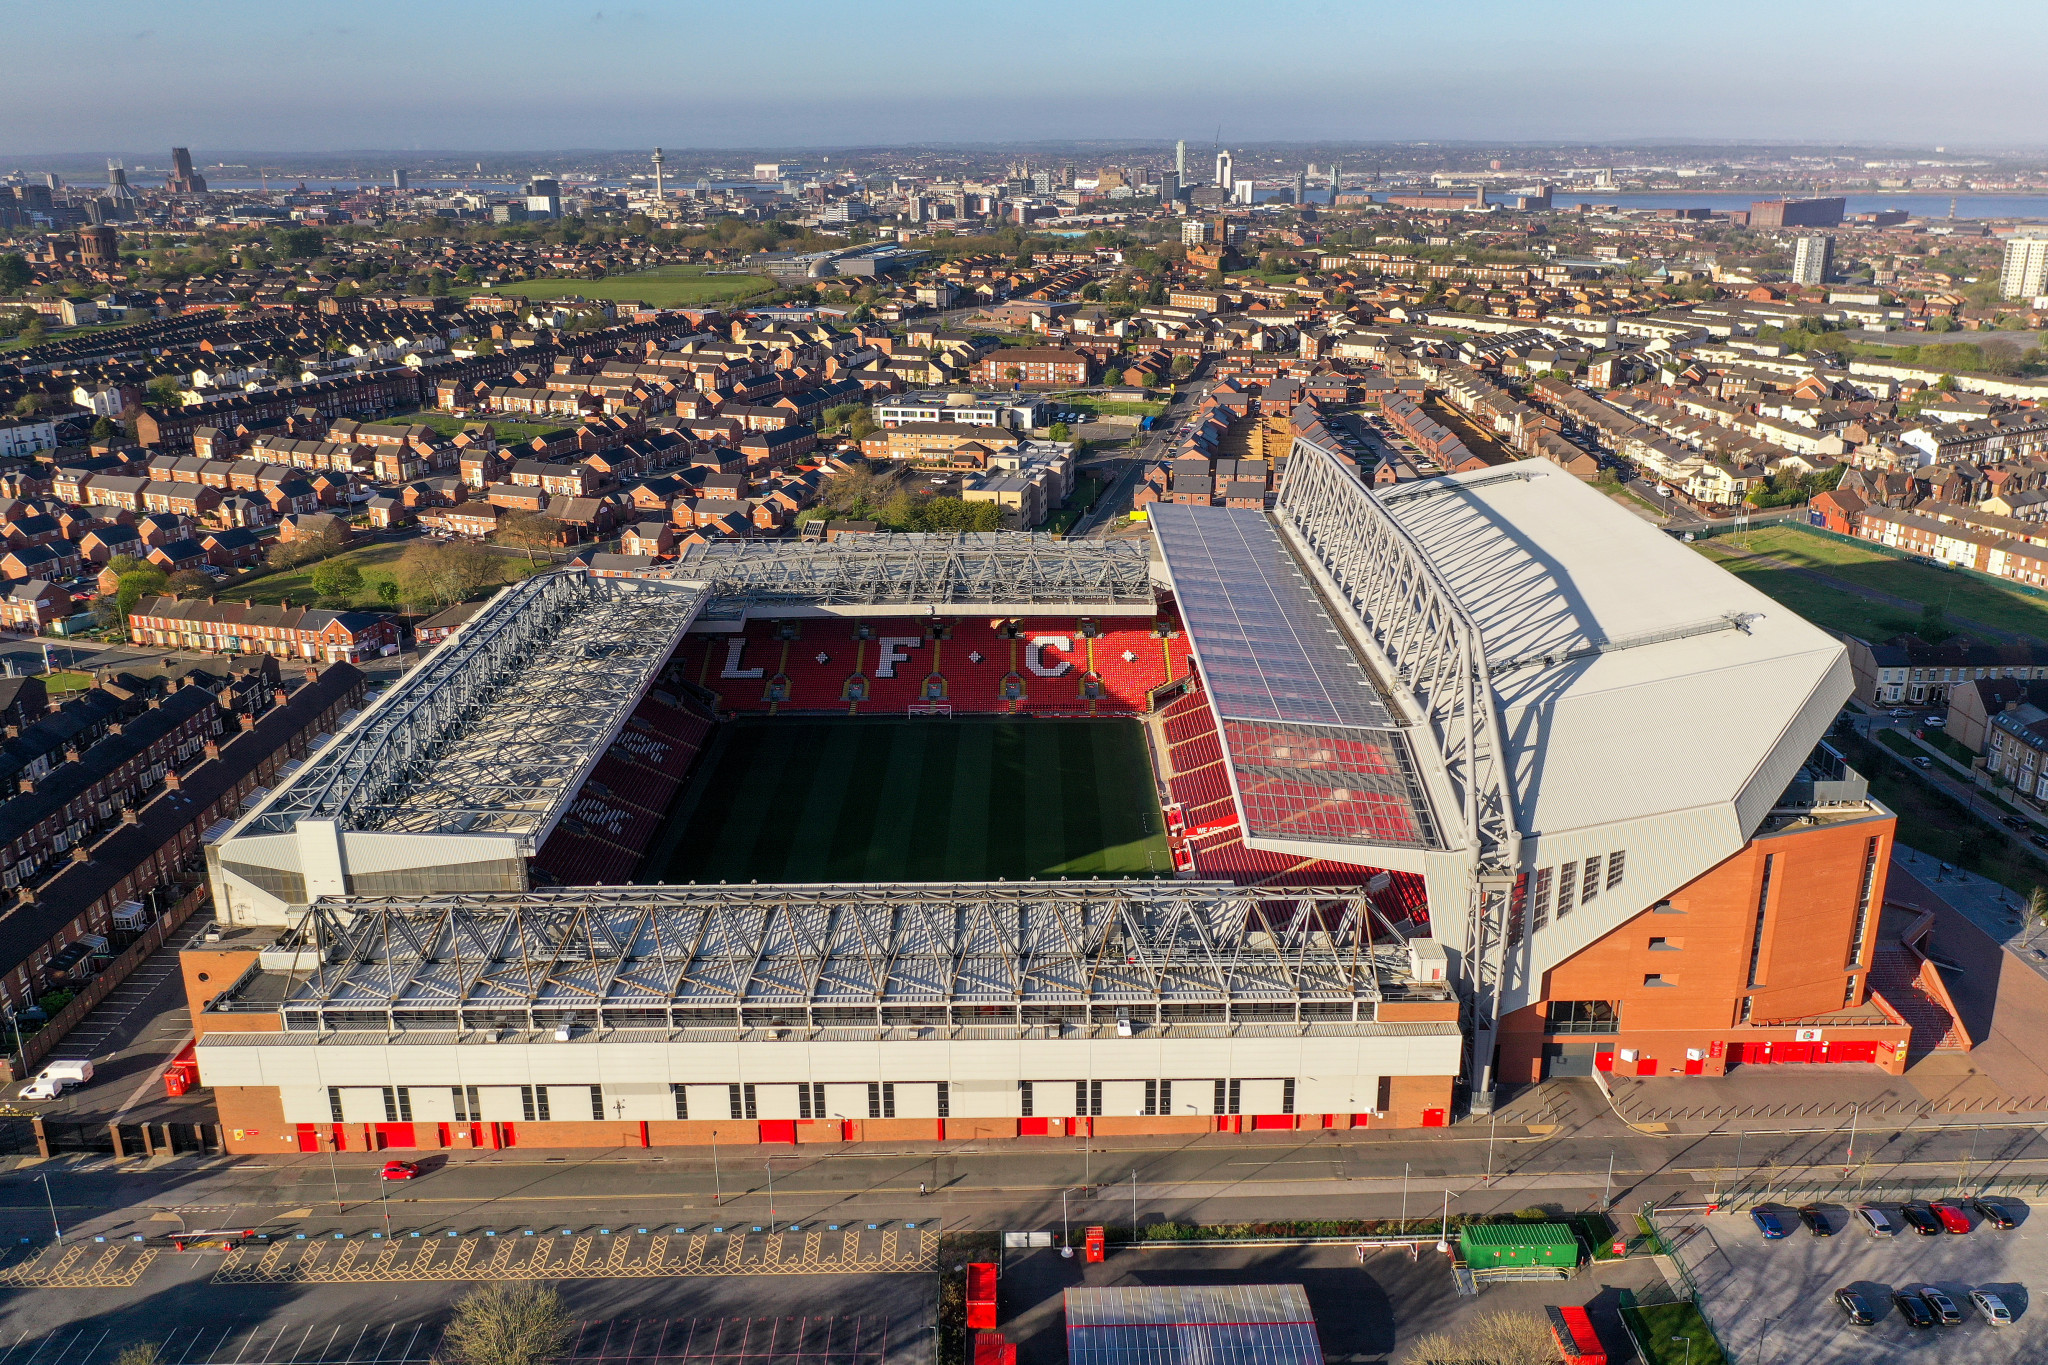 A "Mental Fitness Match" is scheduled to take place at Anfield during the 2021 Rugby League World Cup ©Getty Images